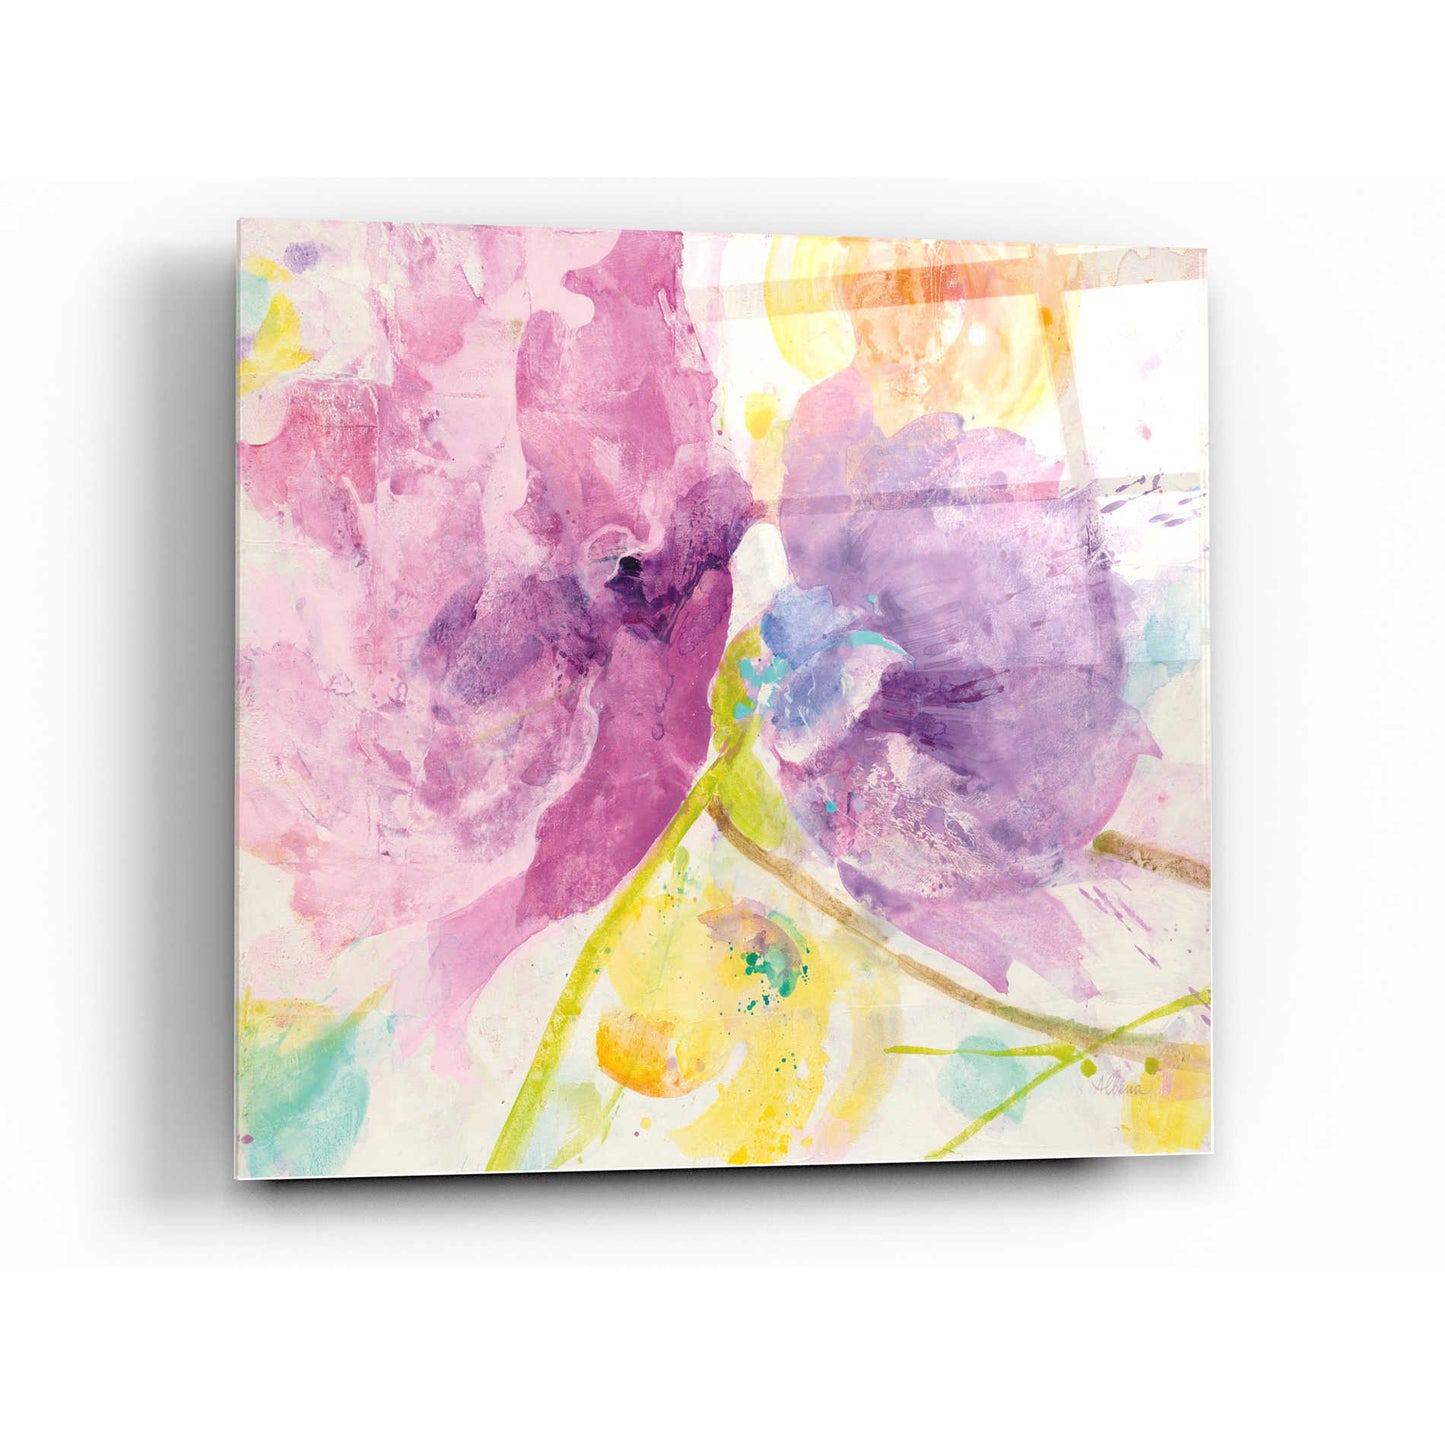 Epic Art 'Spring Abstracts Florals I' by Albena Hristova, Acrylic Glass Wall Art,12x12